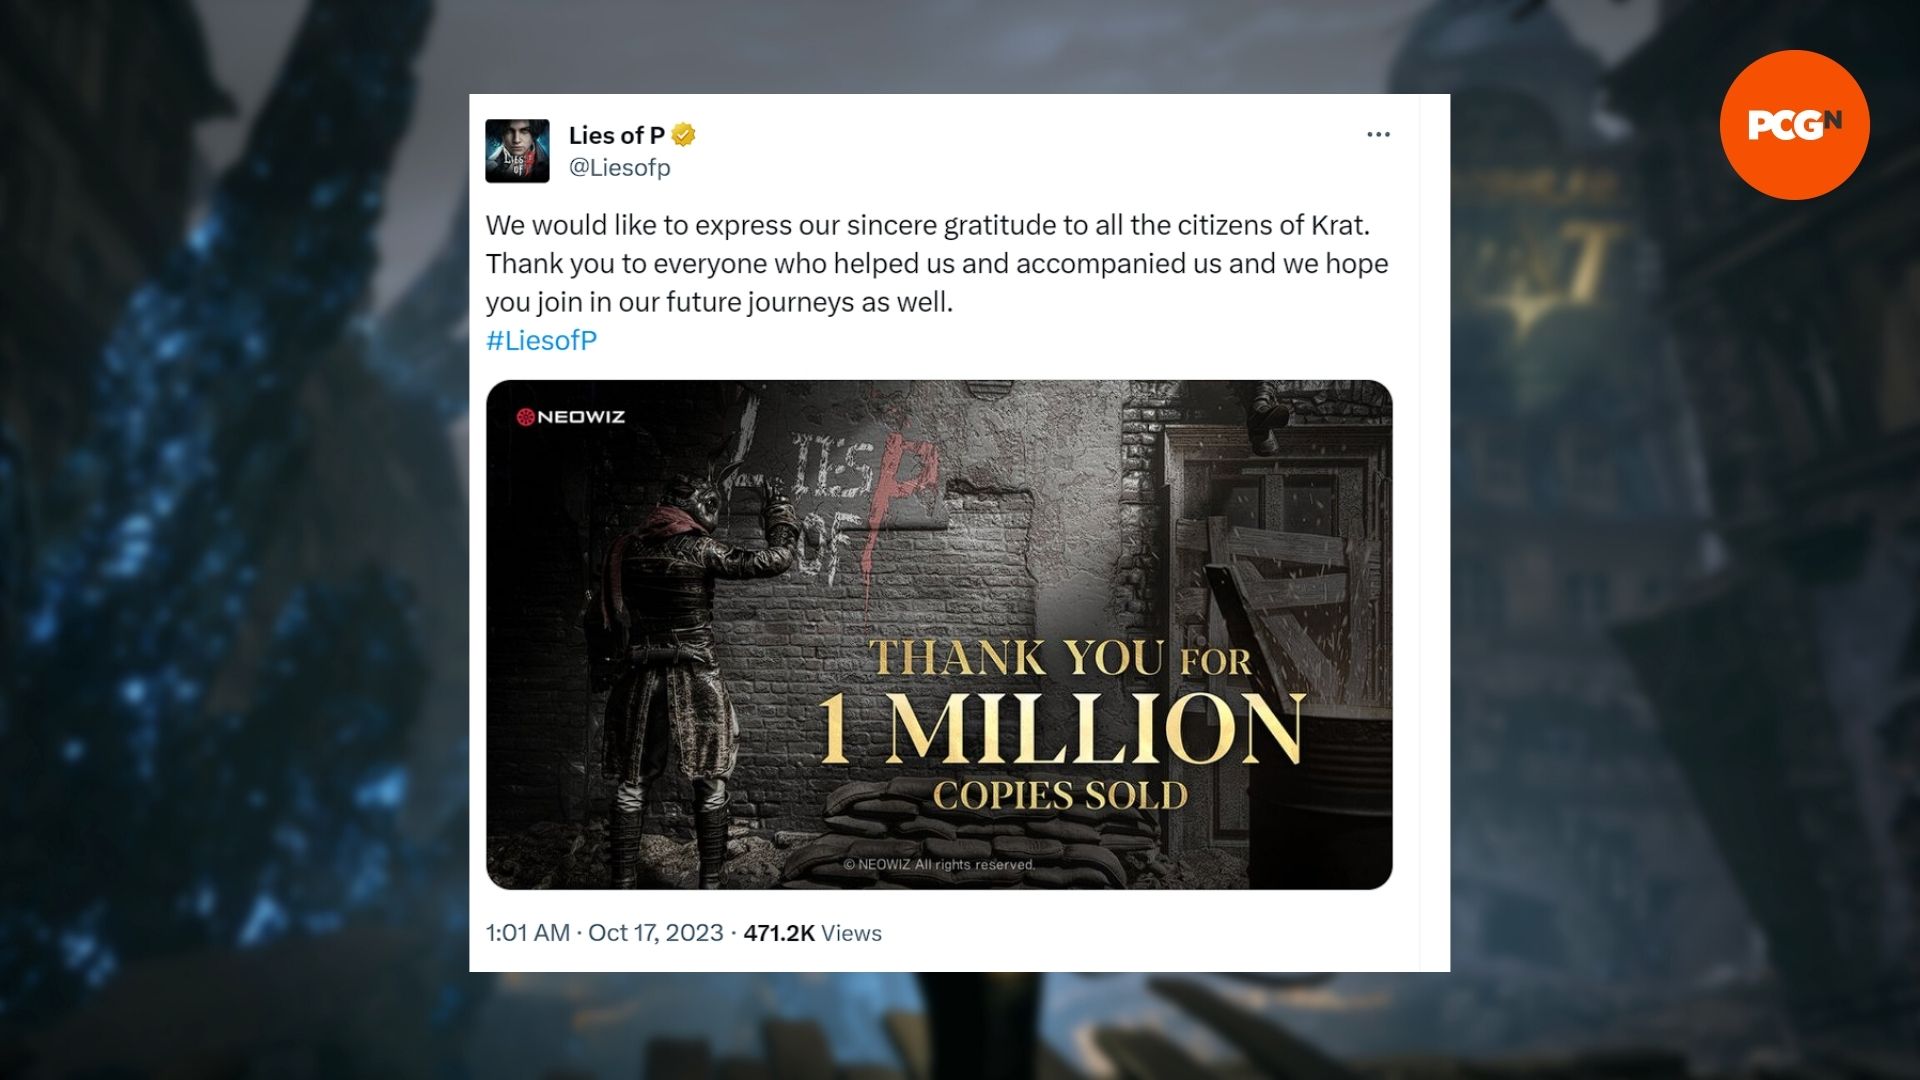 Lies of P has already sold 1 million games worldwide - IG News